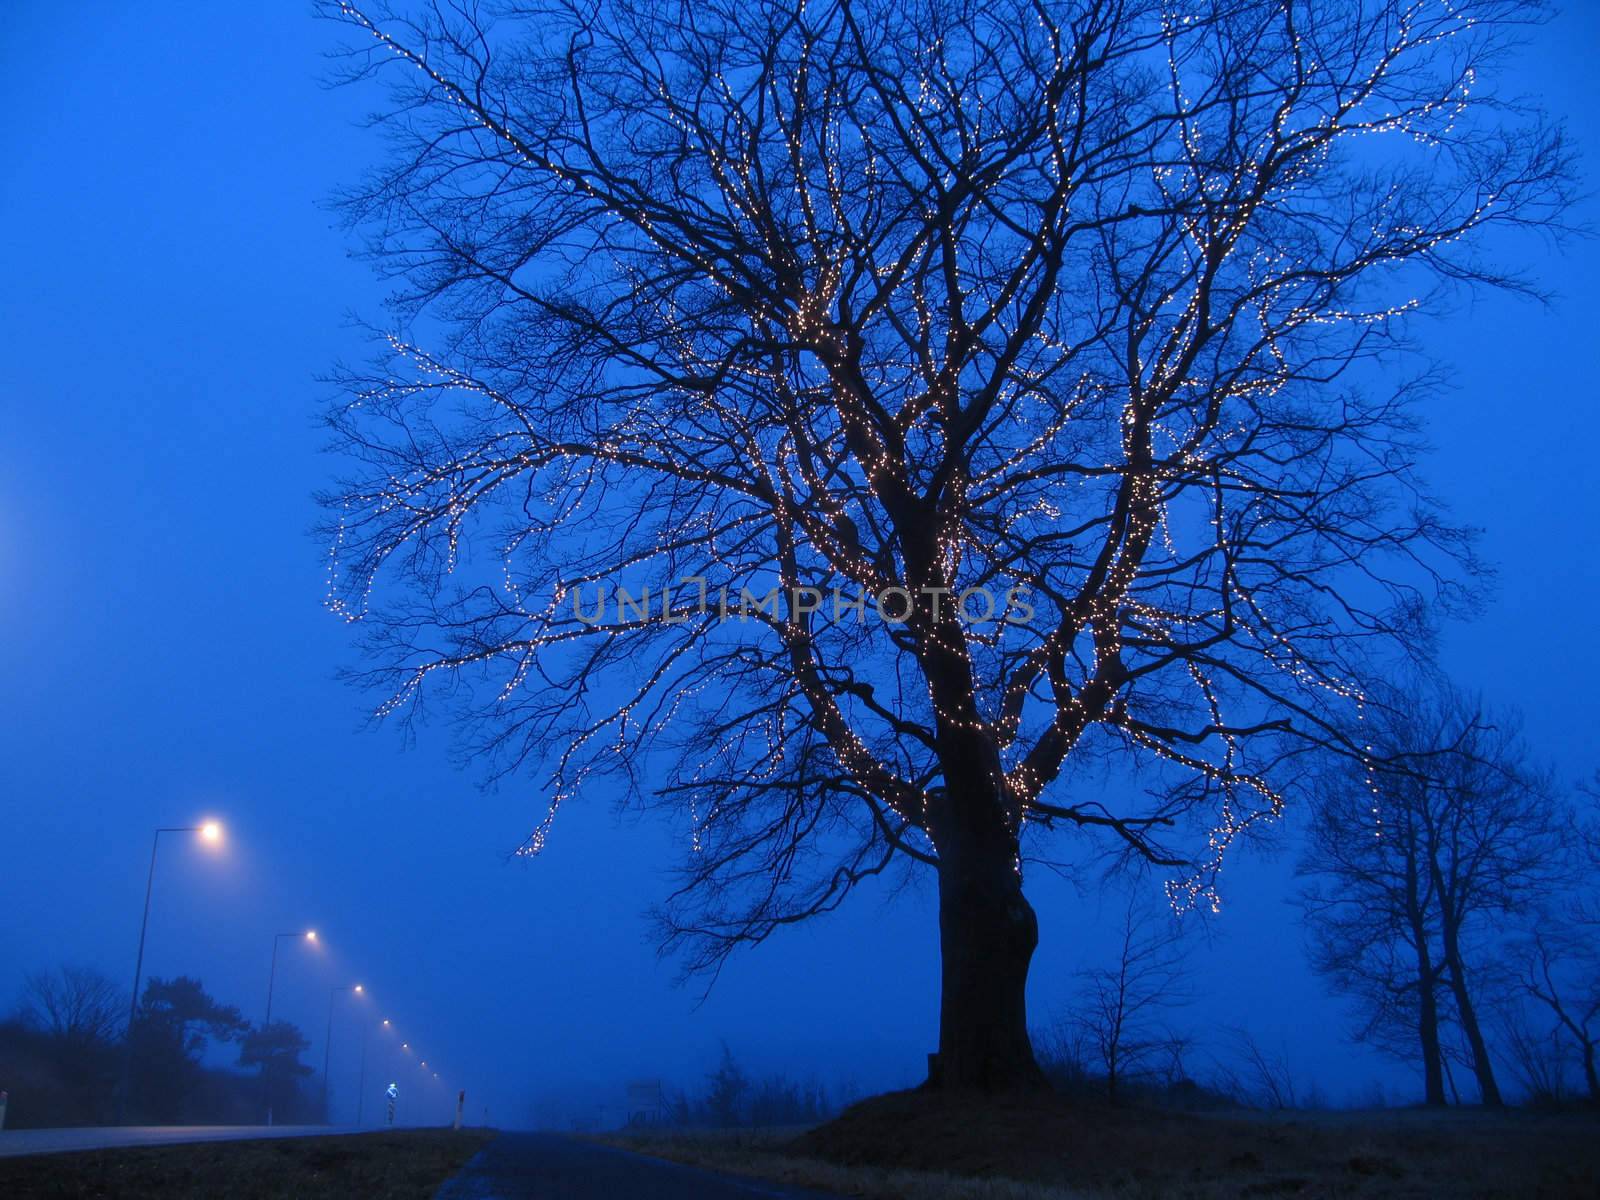 Illuminated tree a foggy blue hour in December.